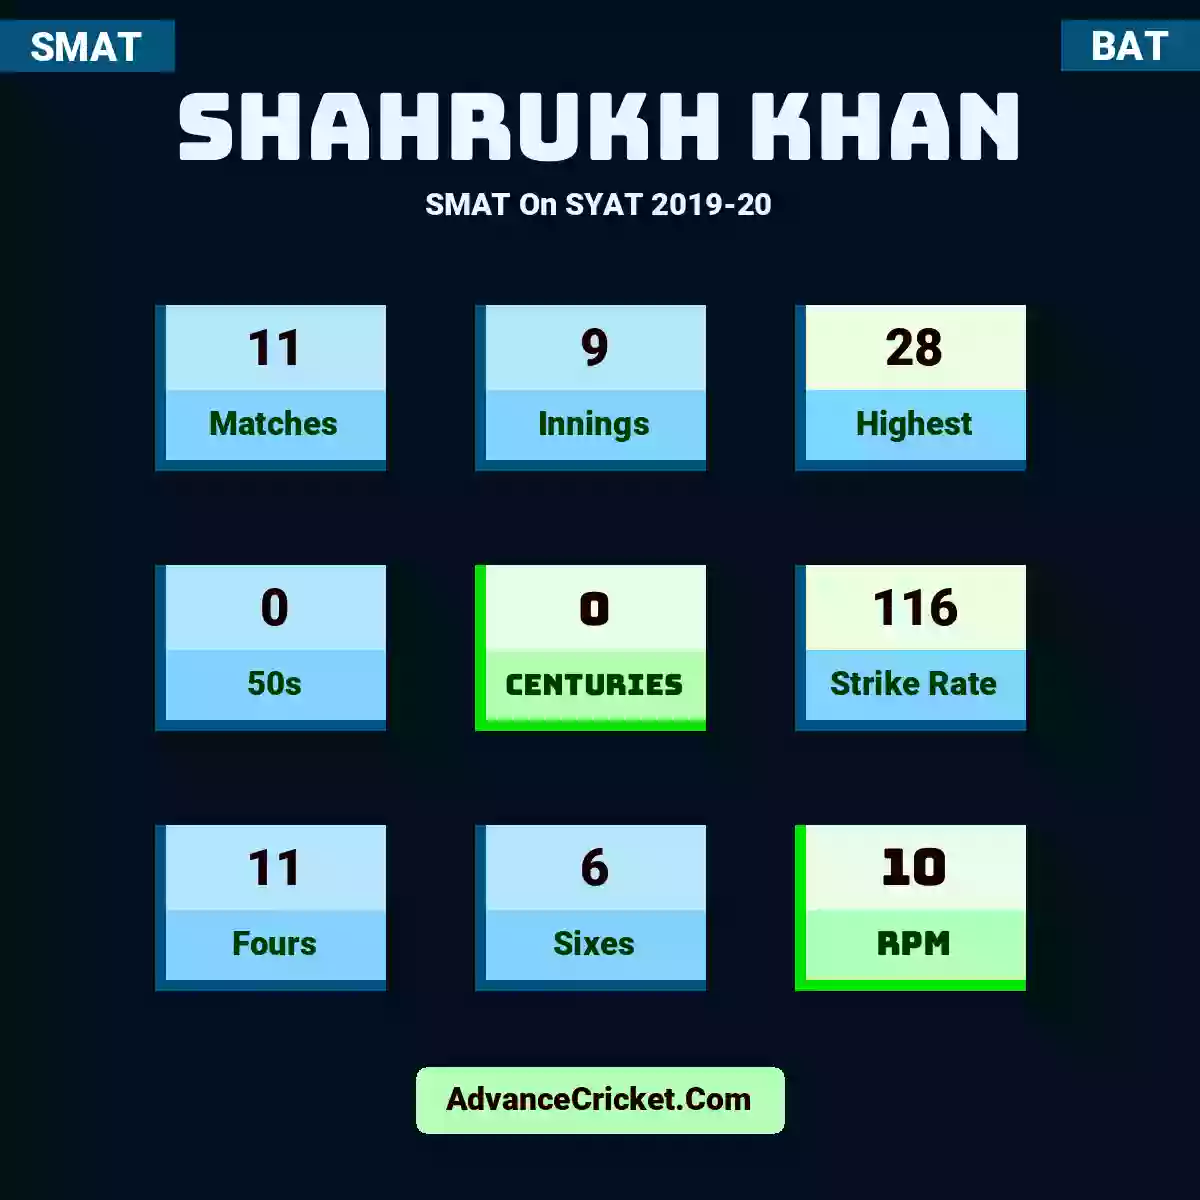 Shahrukh Khan SMAT  On SYAT 2019-20, Shahrukh Khan played 11 matches, scored 28 runs as highest, 0 half-centuries, and 0 centuries, with a strike rate of 116. S.Khan hit 11 fours and 6 sixes, with an RPM of 10.